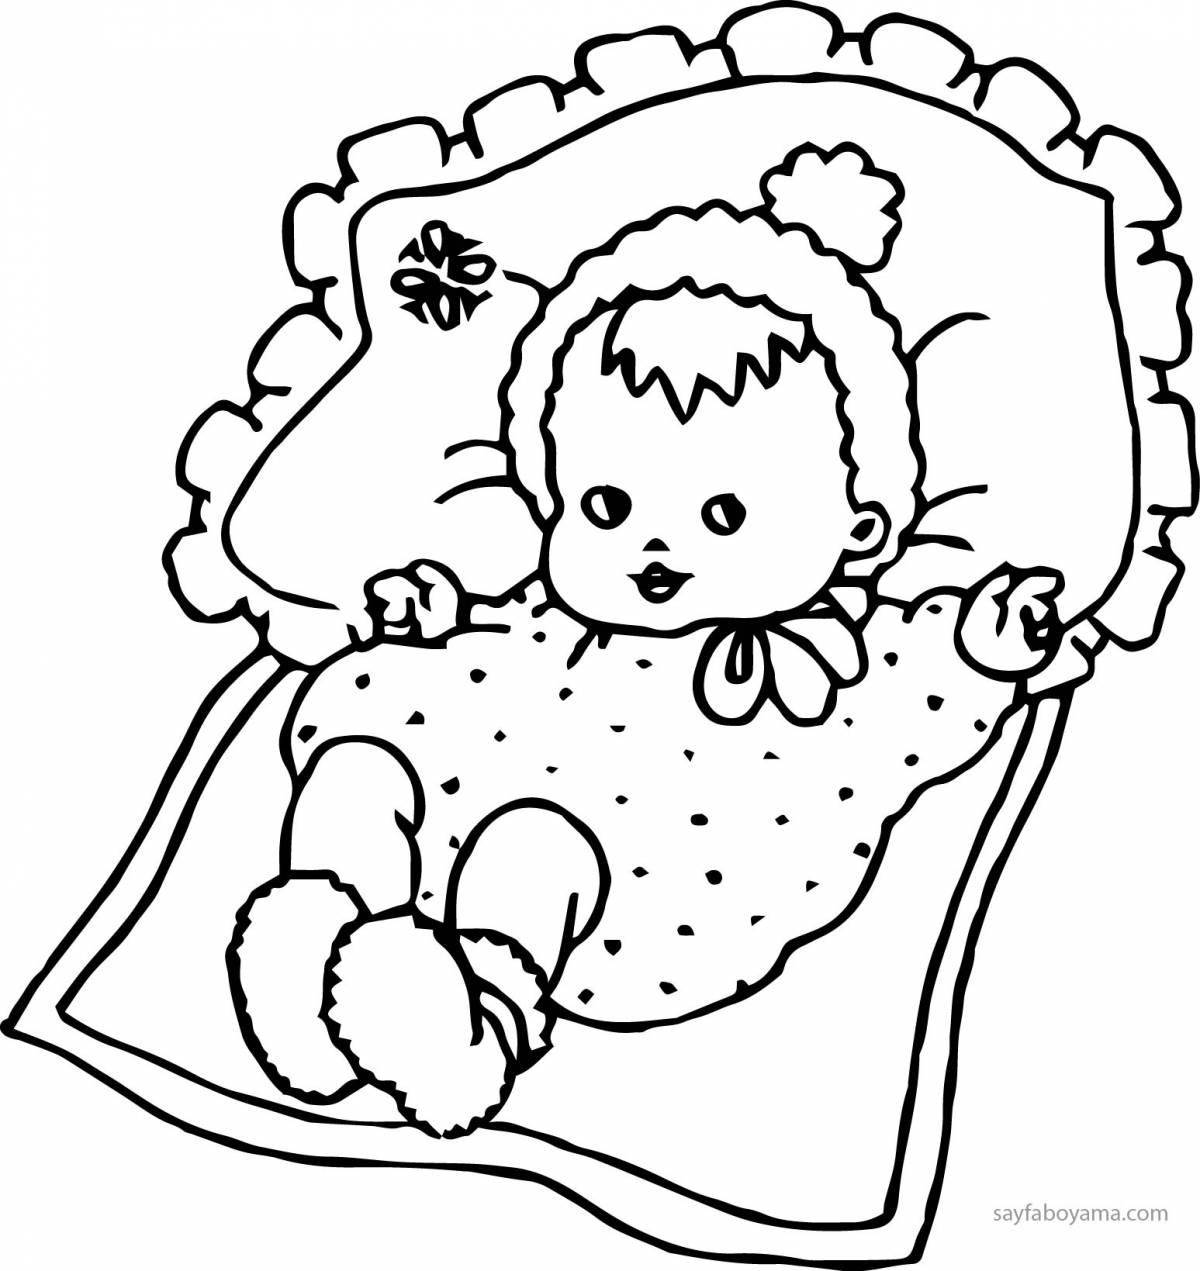 Reborn coloring page live